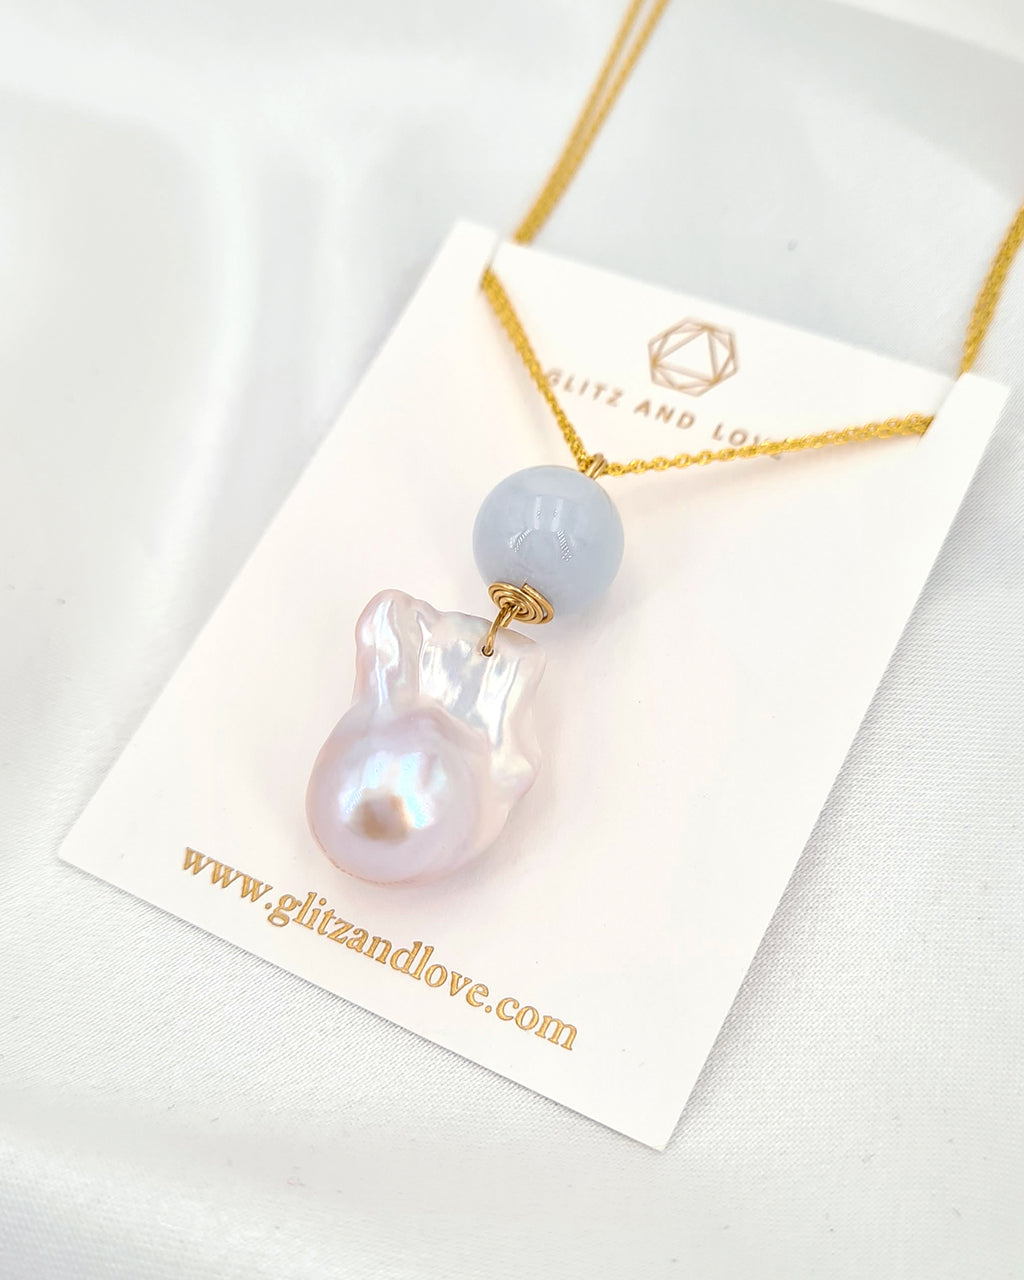 White Baroque Pearl & Jade Gold Necklace - Minimalist & Elegant - Wedding Bridal Jewelry for Brides and Bridesmaids | Baroque Pearl Jewelry for Mother's Day Gifts